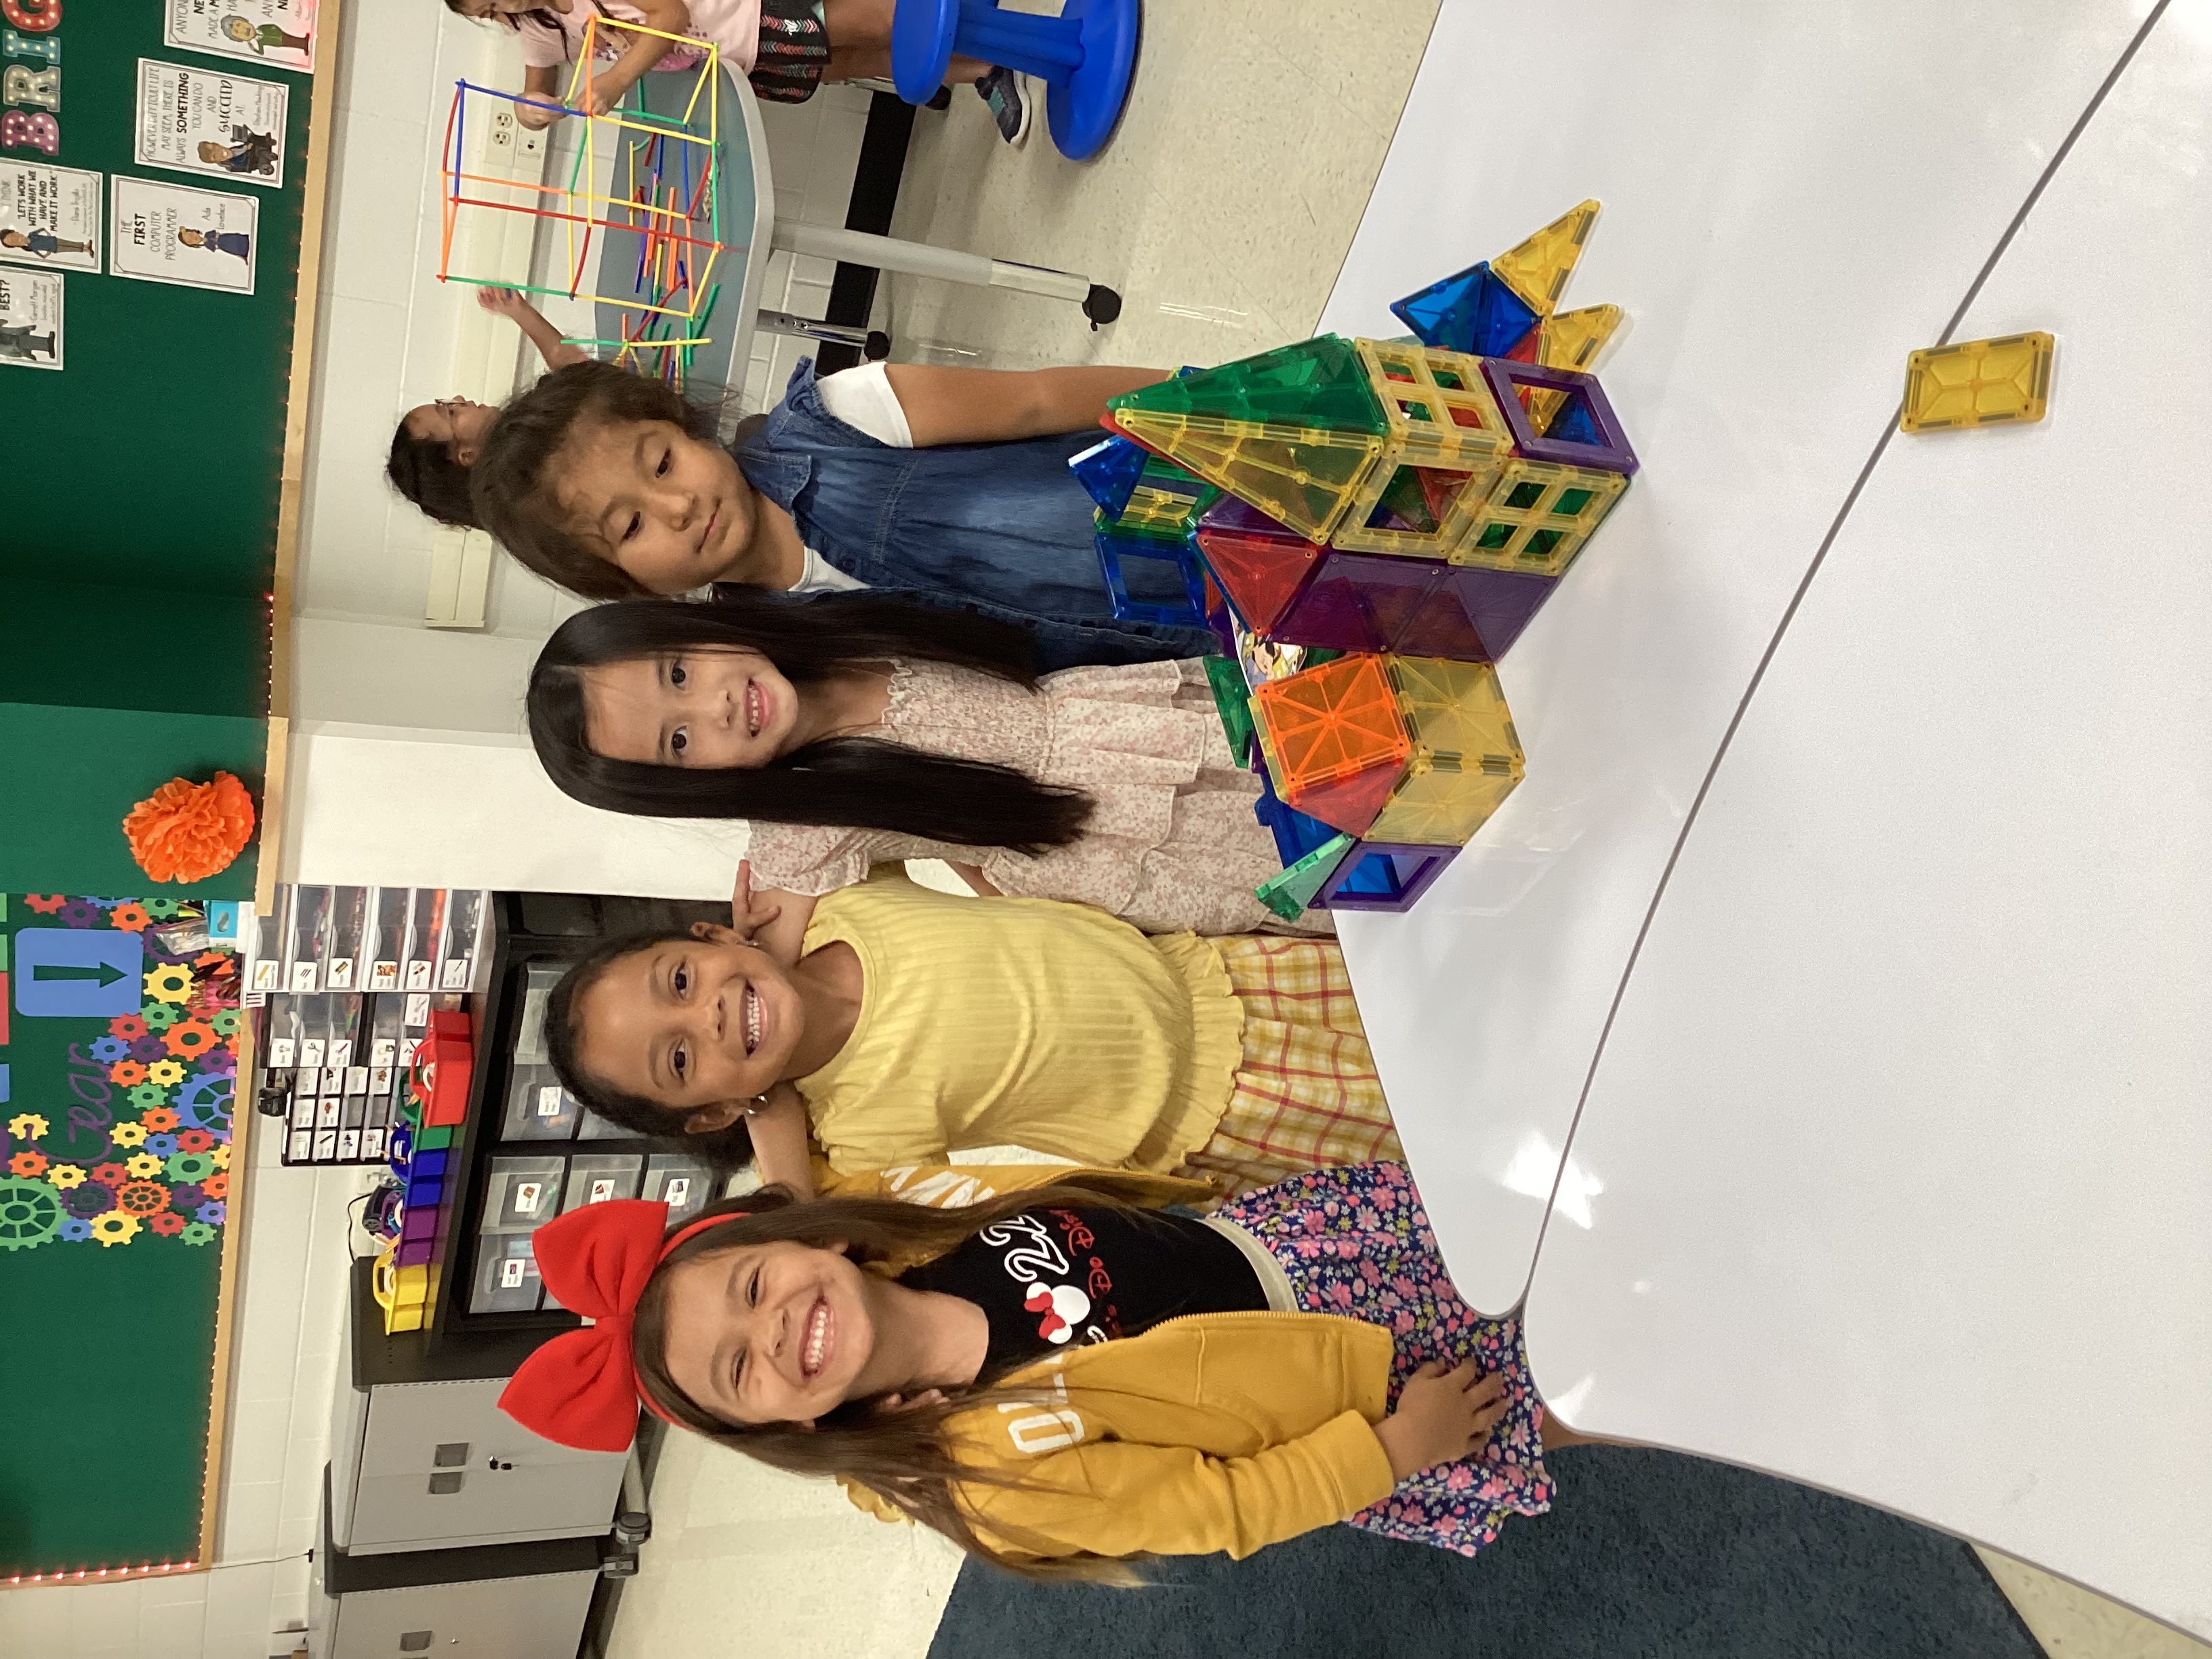 Kinder students worked together to build a fort for a character in the book, "Little Red Fort".